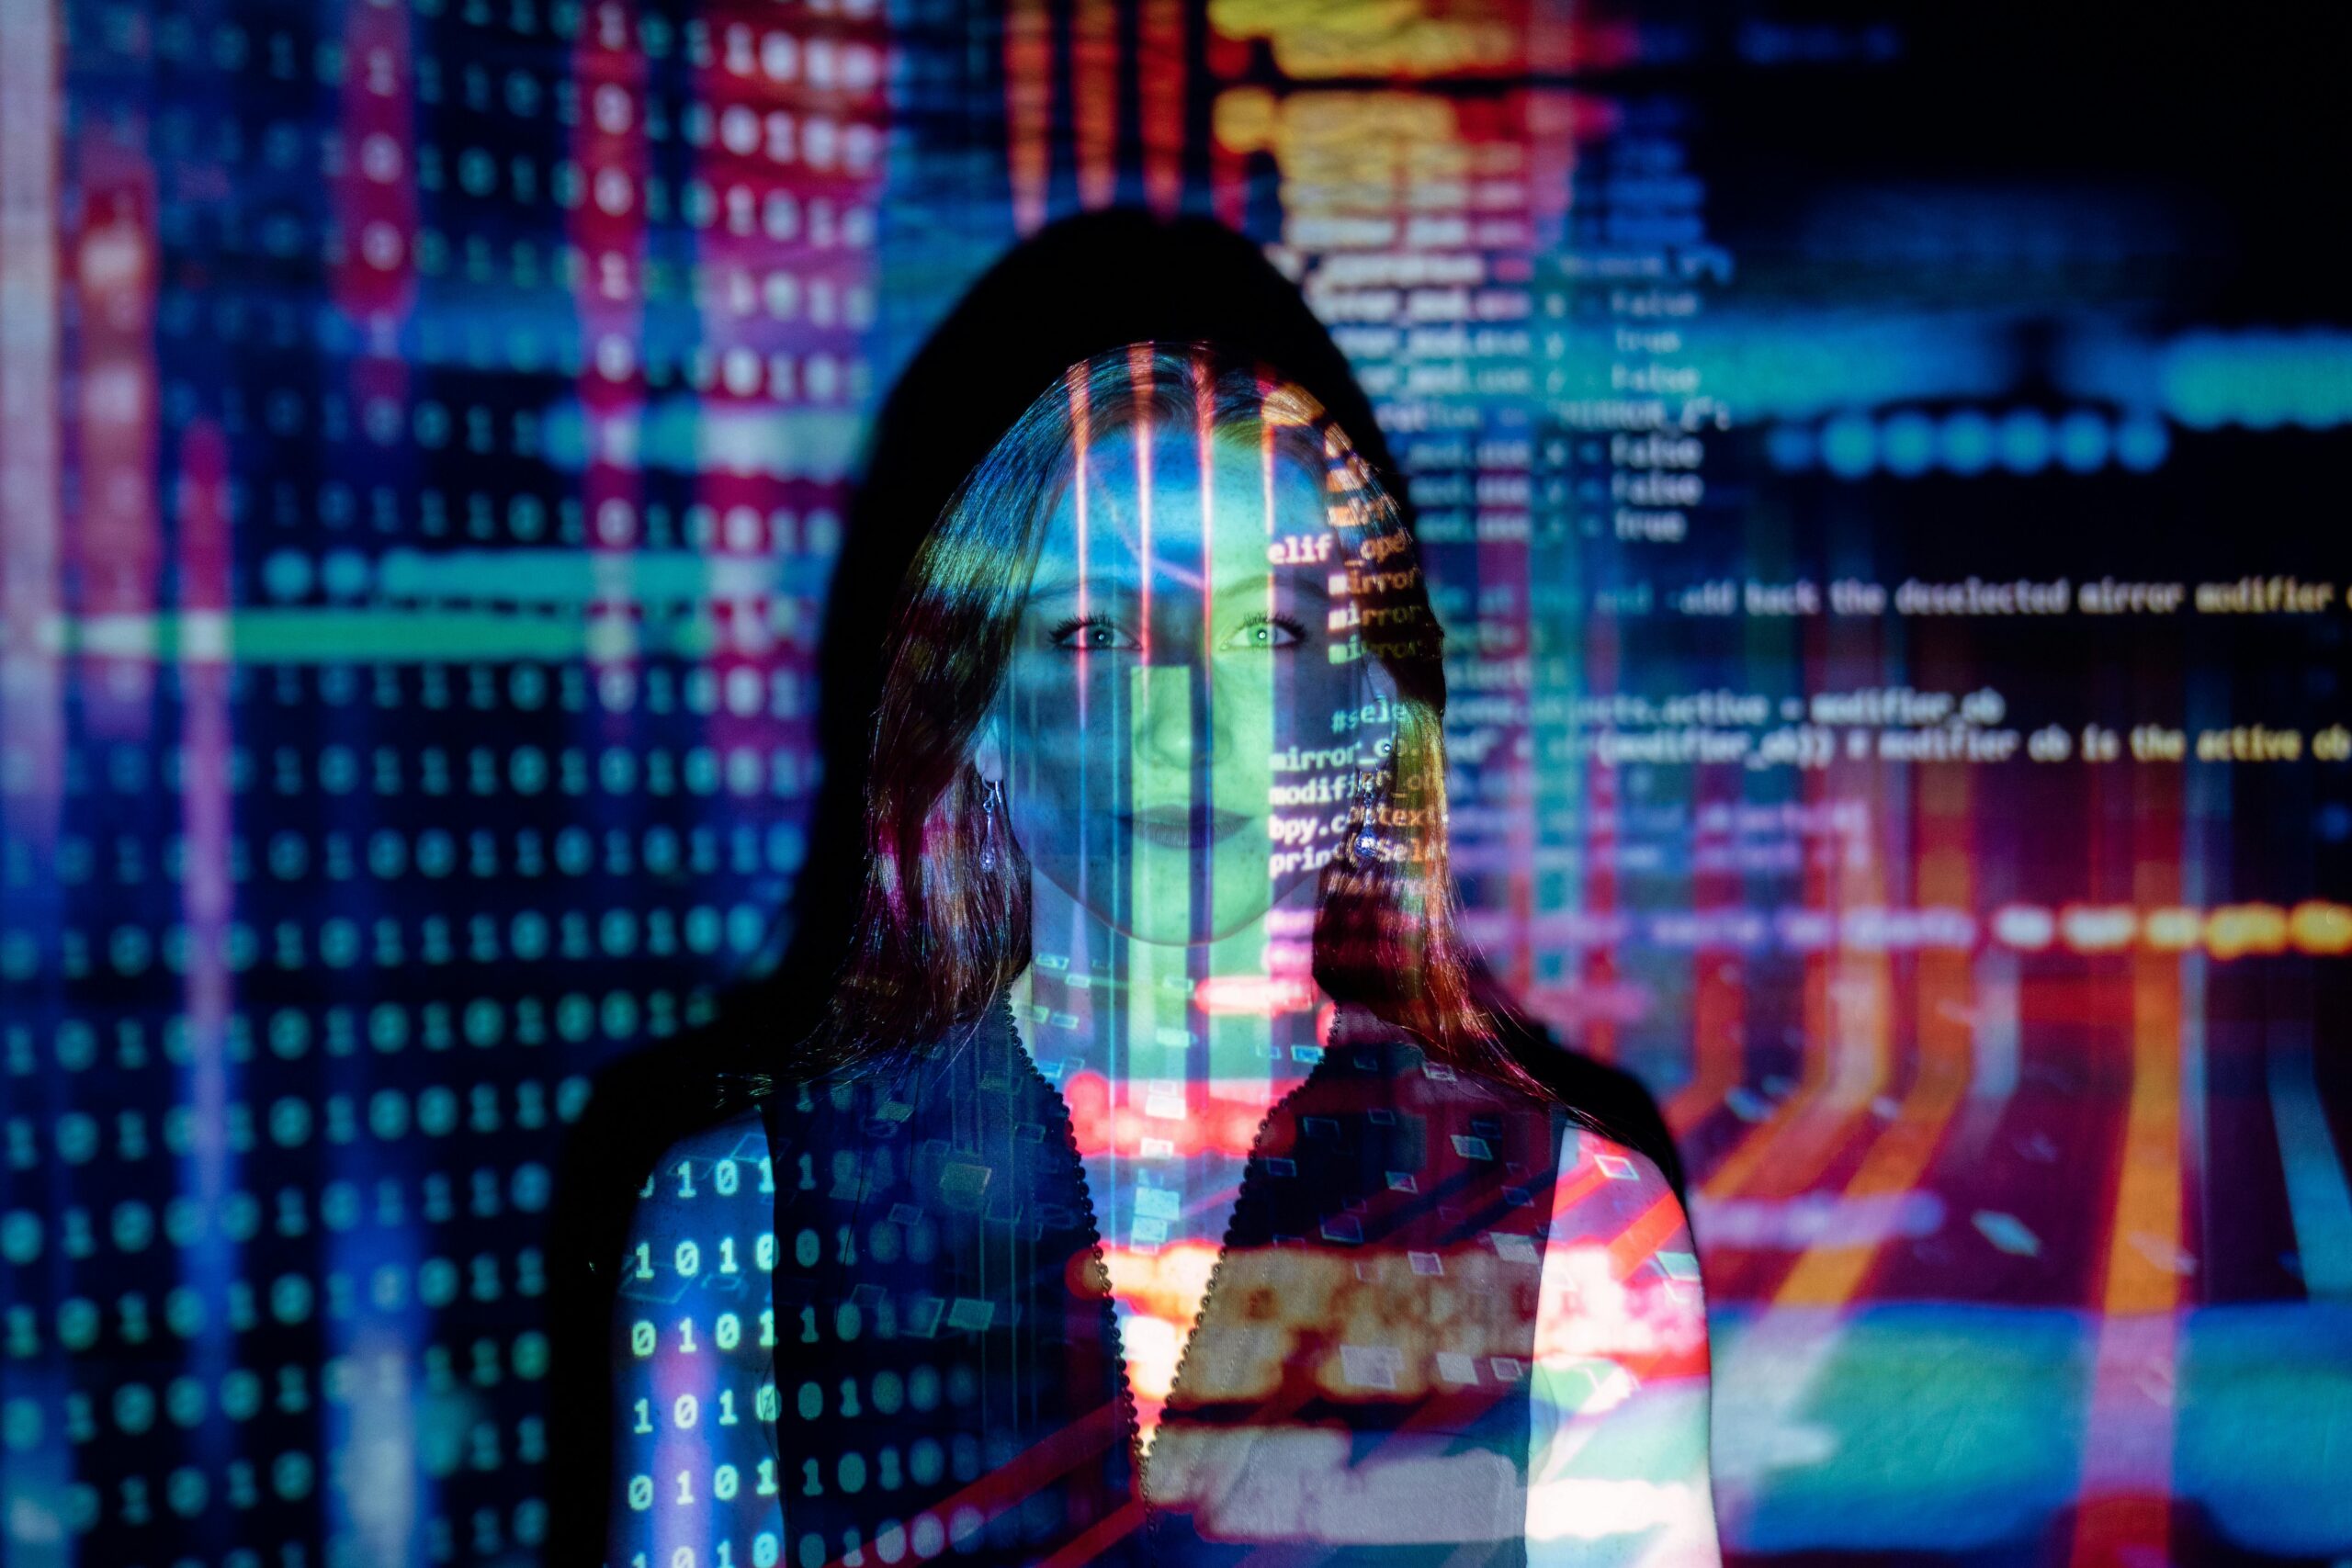 code projected over a woman